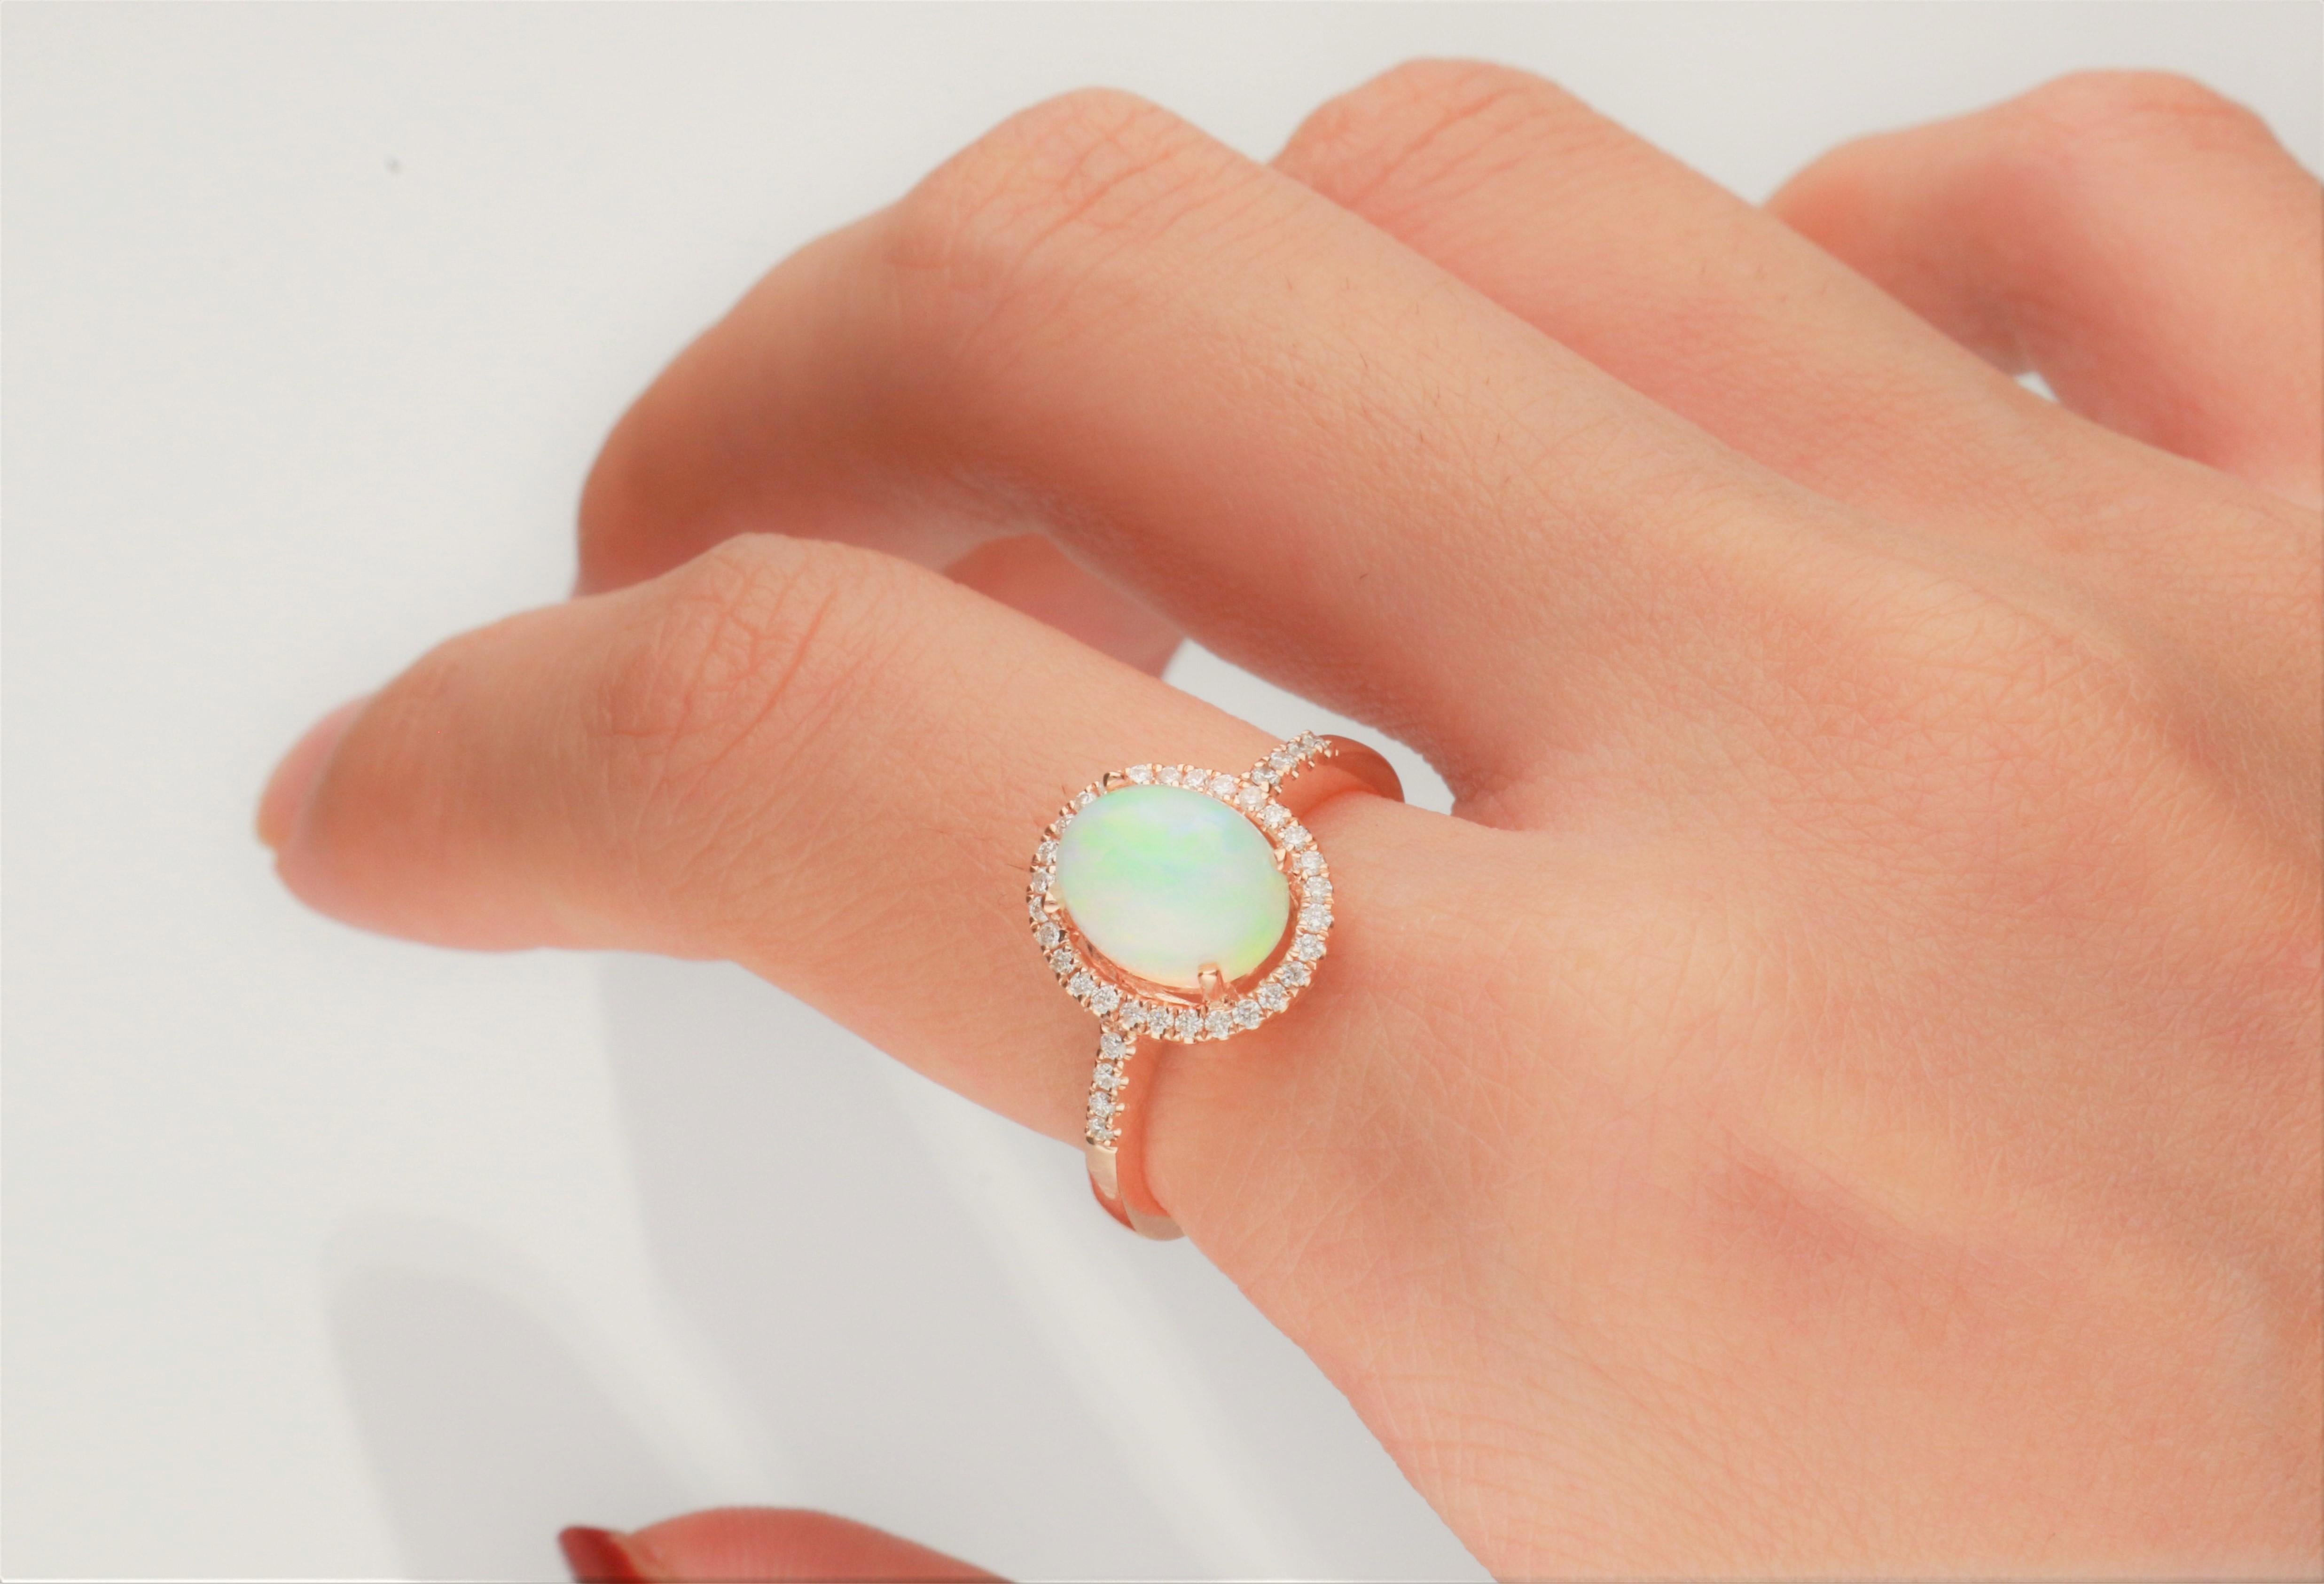 This beautiful Natural Opal Ring is crafted in 14-karat Rose gold and features a 1.29 carat 1 Pc Natural Opal and 36 Pcs Round White Diamonds in GH- I1 quality with 0.18 Ct in a prong-setting. This Ring comes in sizes 6 to 9, and it is a perfect